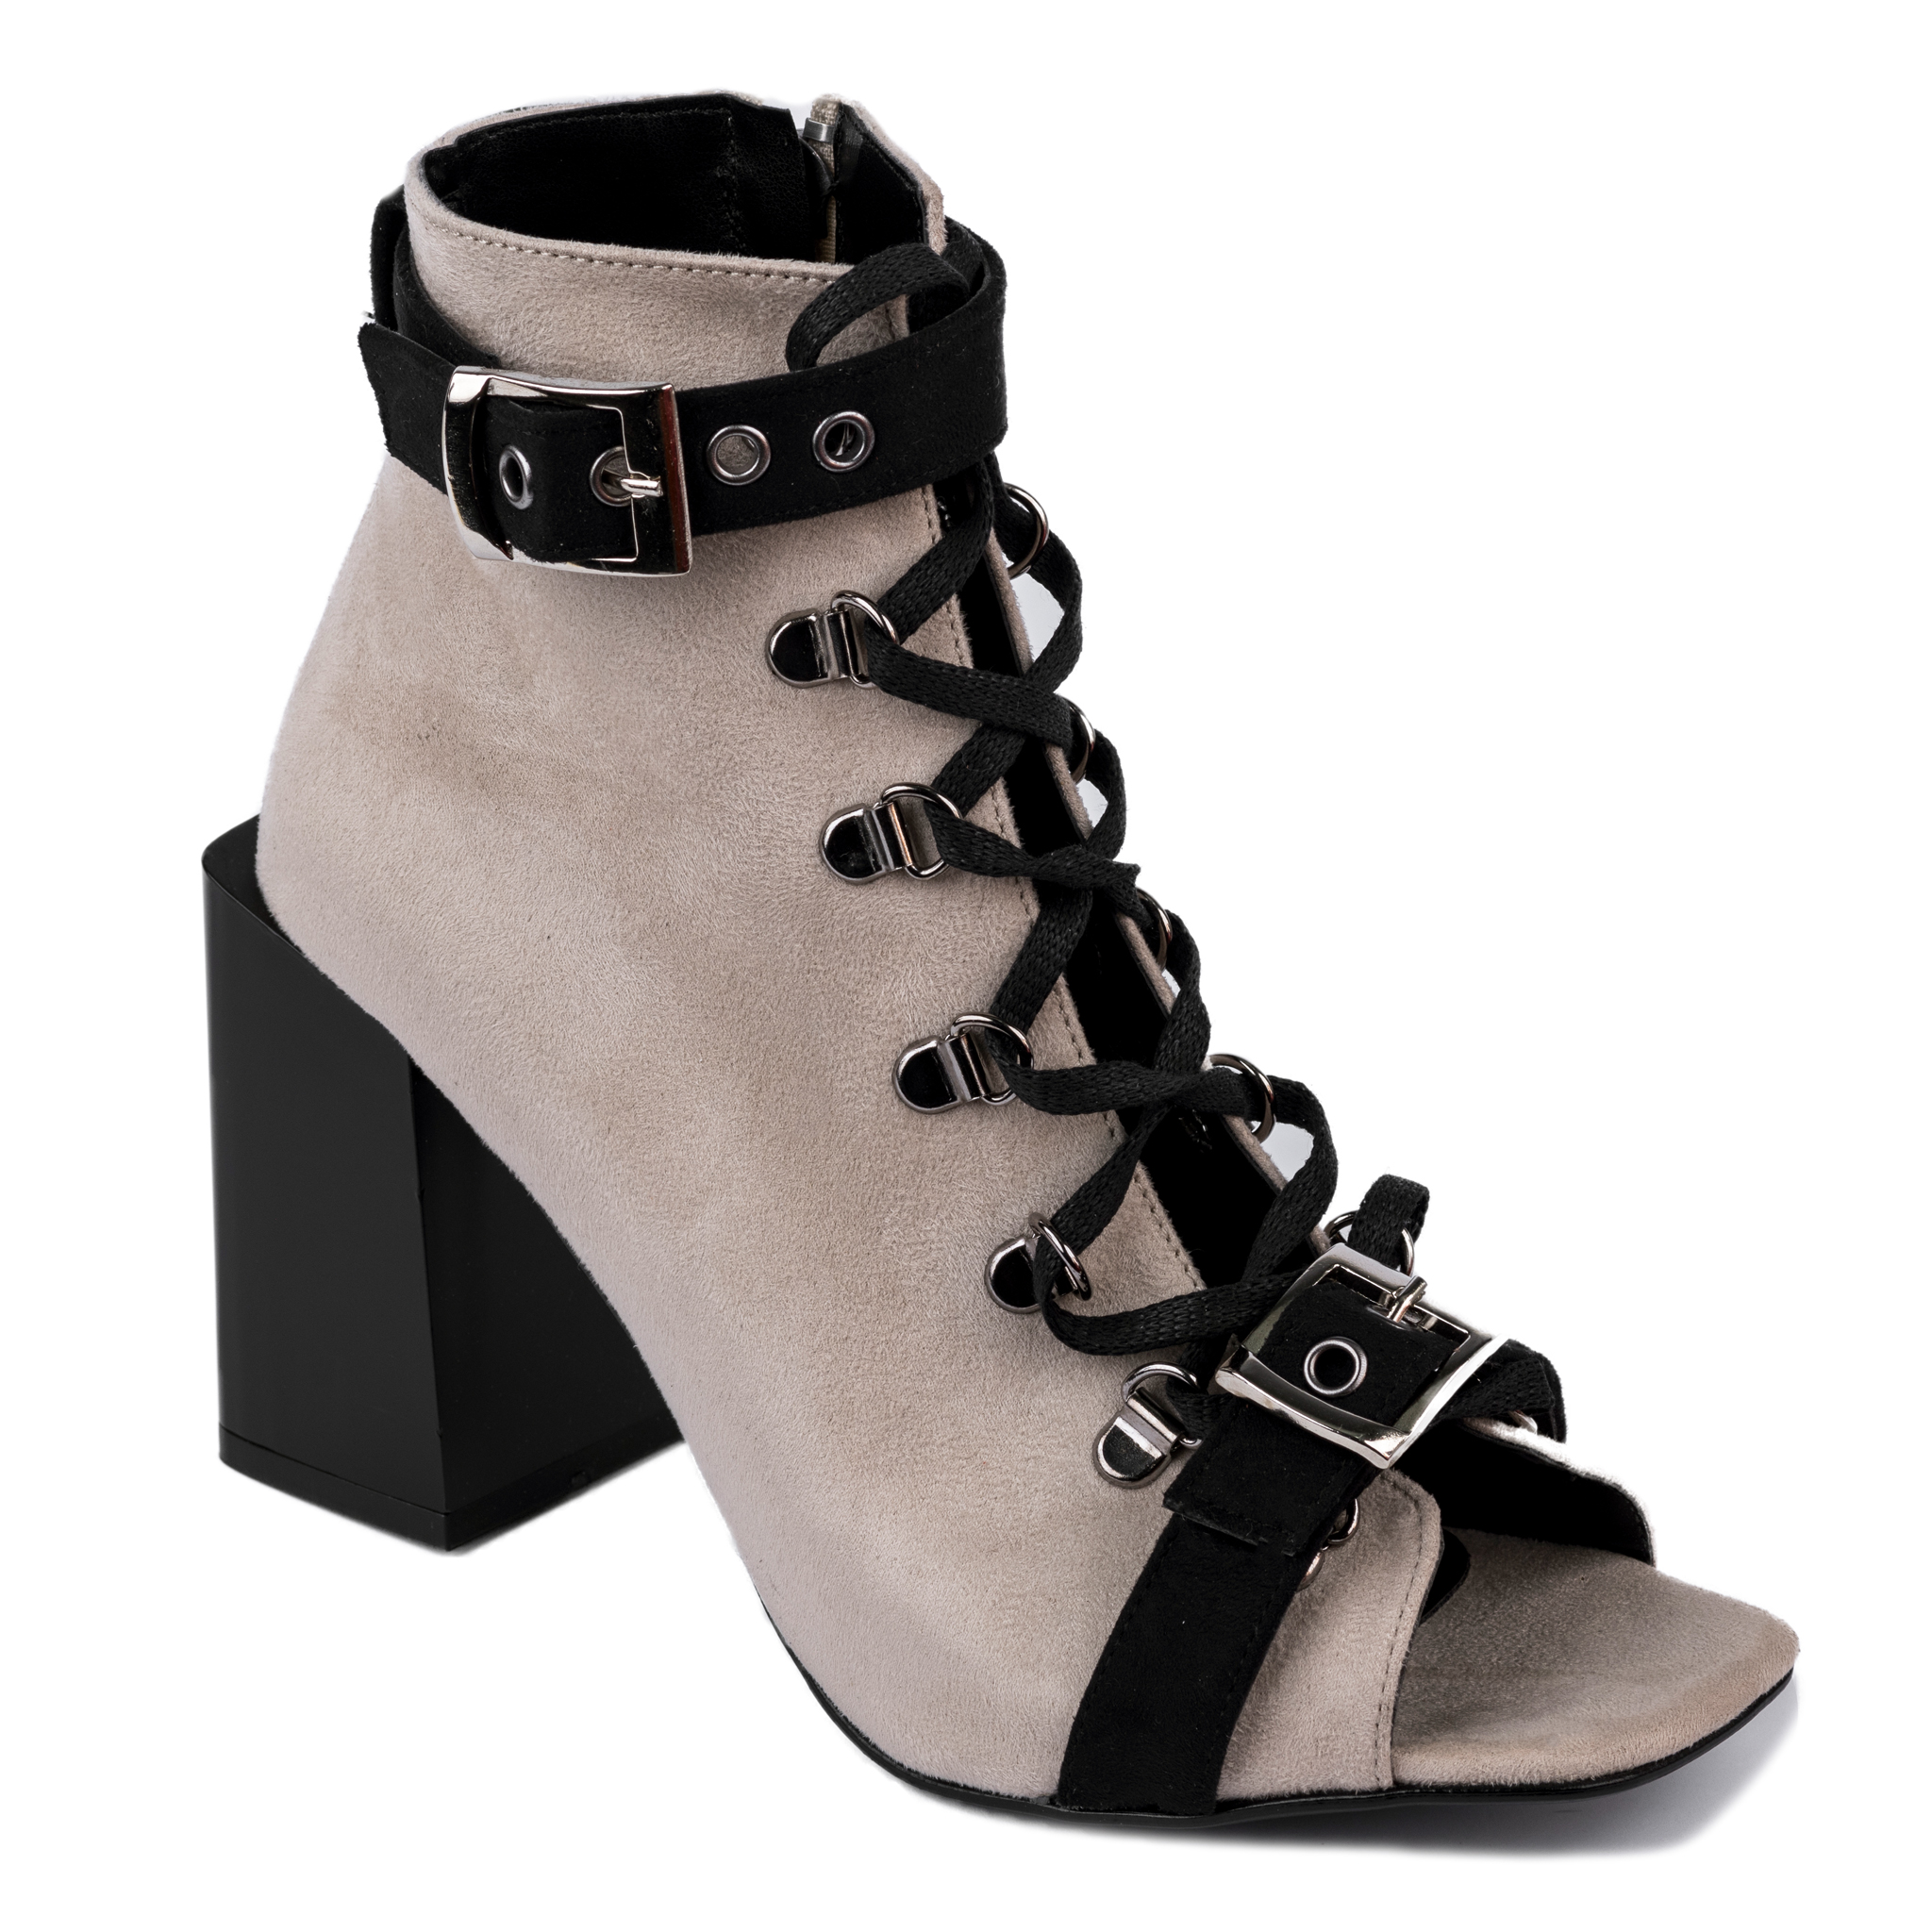 VELOUR PEEP TOE ANKLE BOOTS WITH BELTS AND BLOCK HEEL - BEIGE